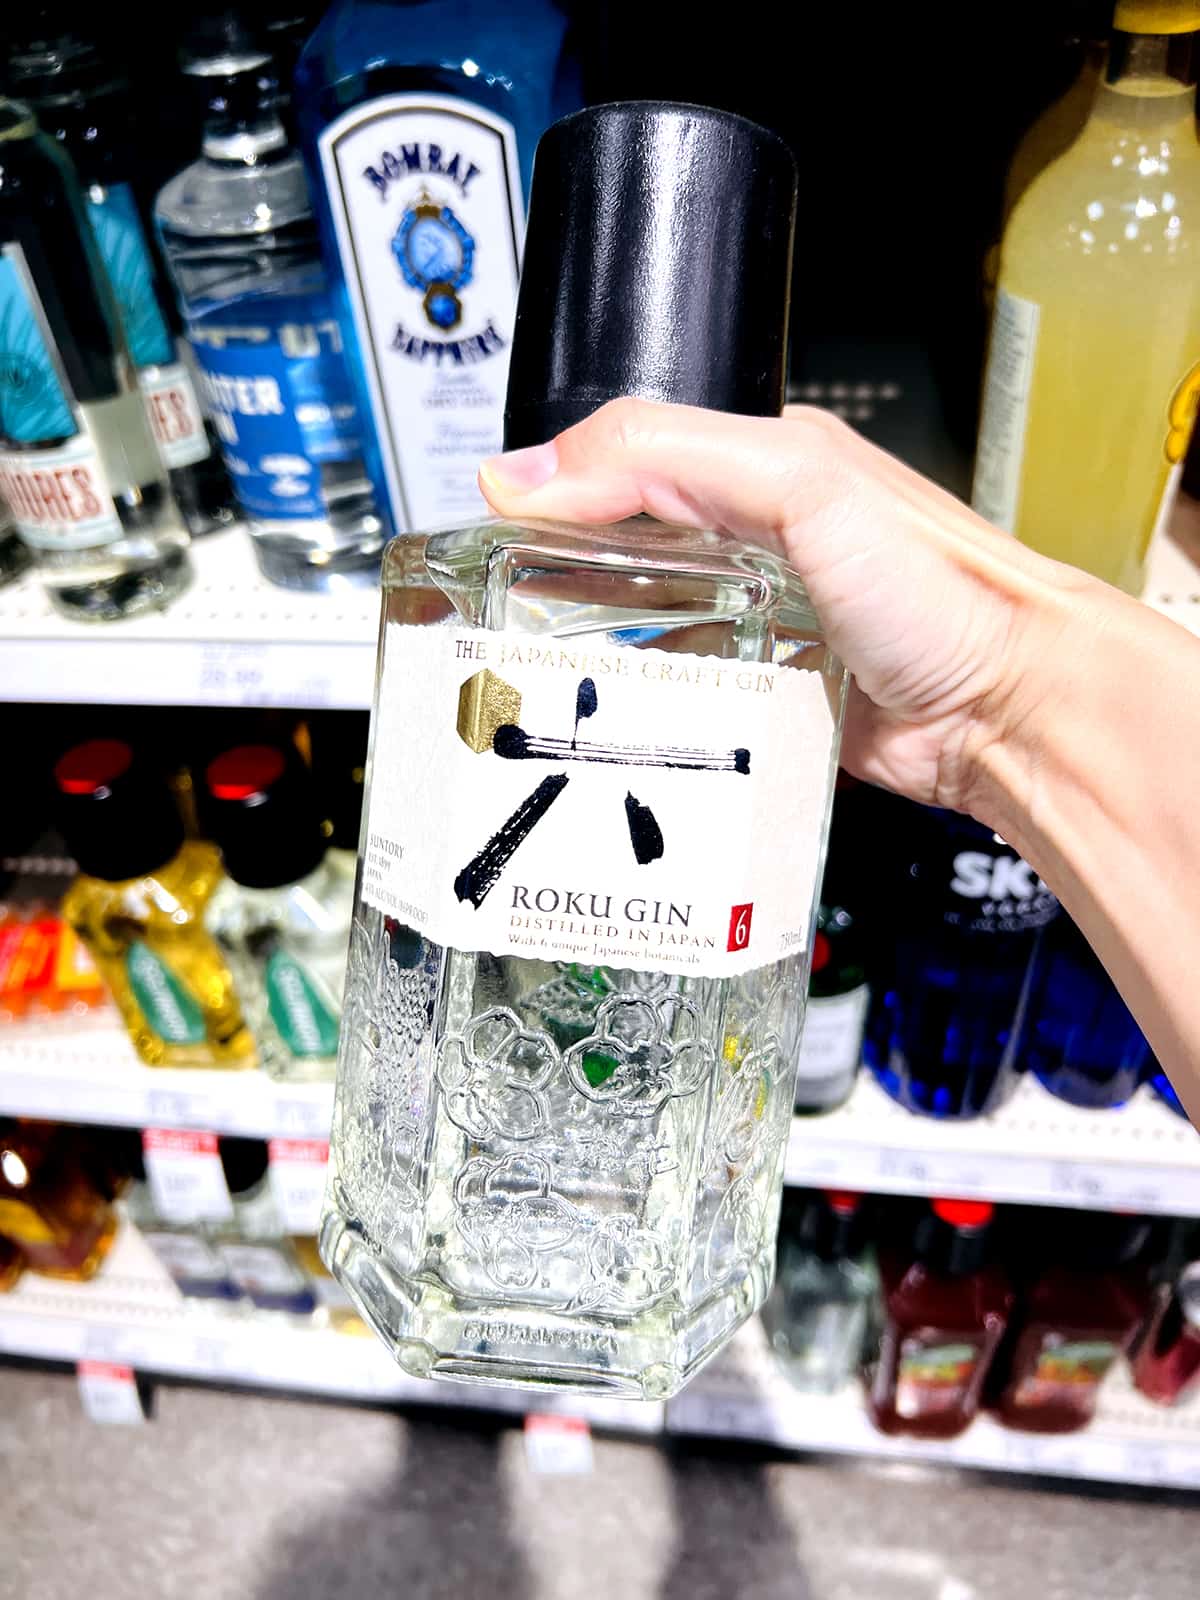 hand holding bottle of roku gin in grocery store aisle